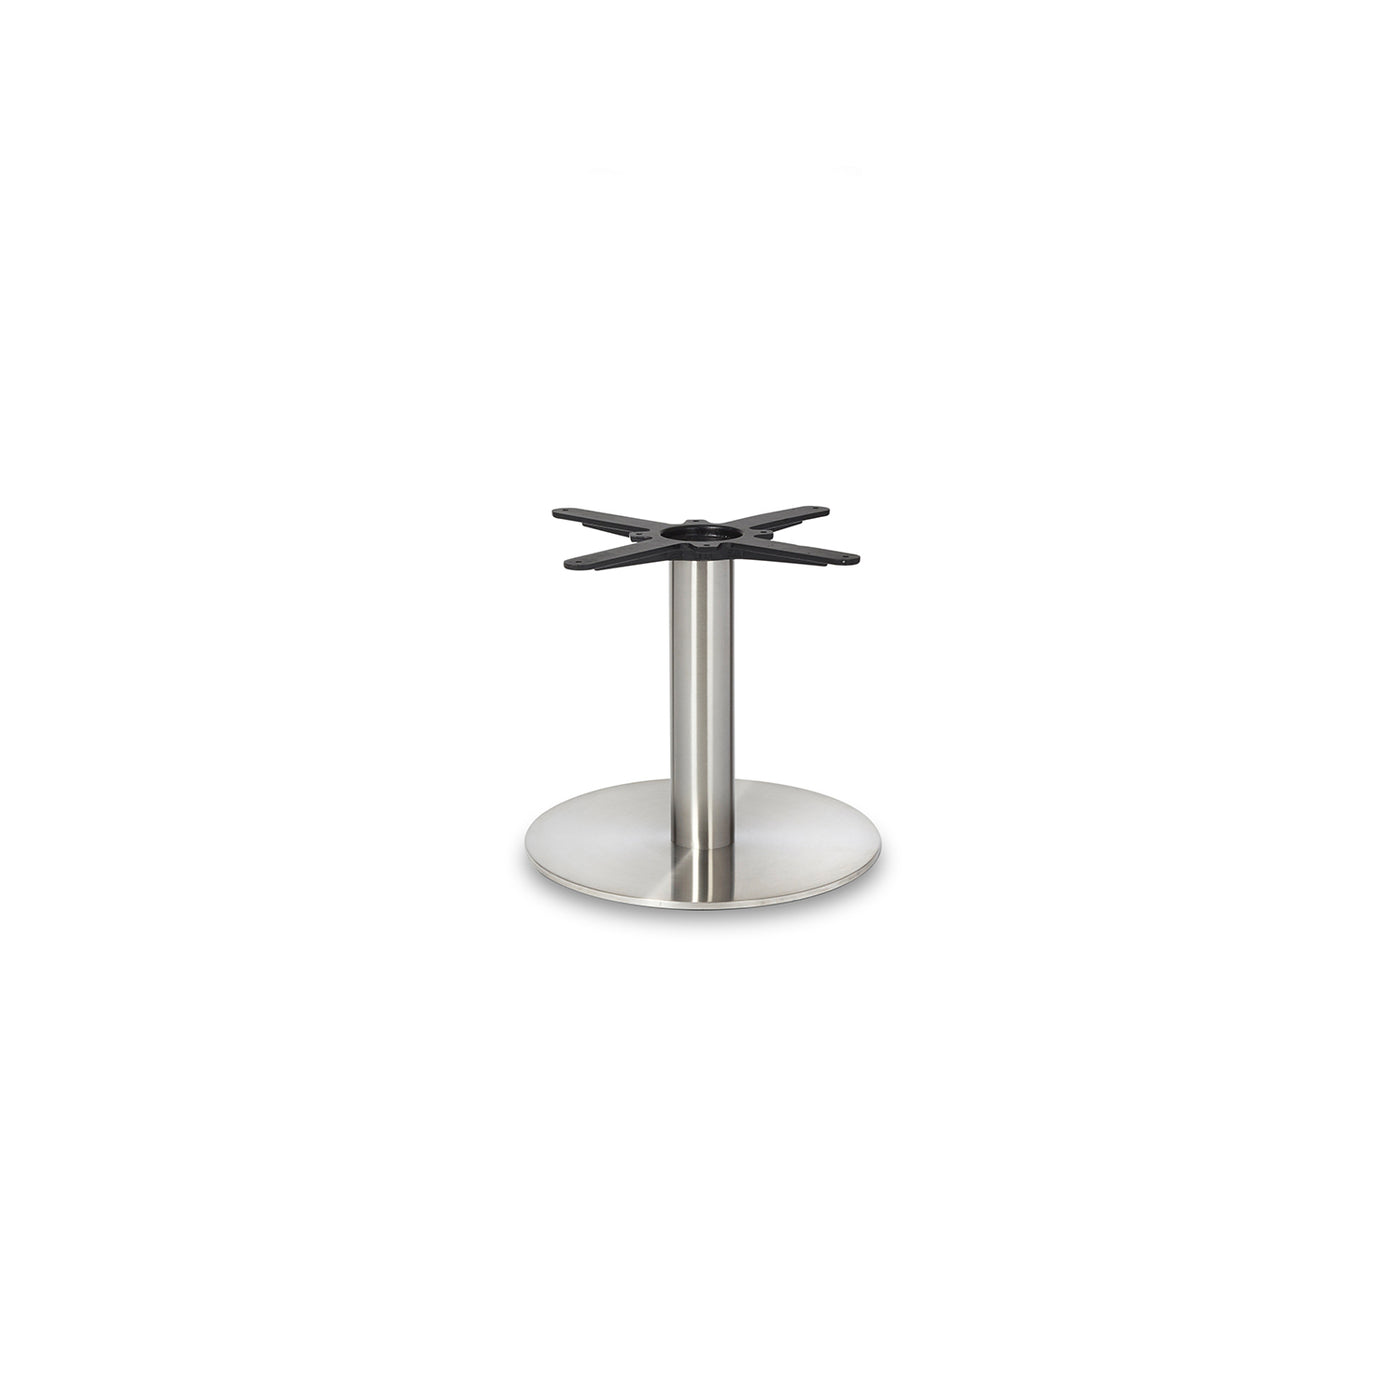 Noah Small Round Table Base - Stainless Steel